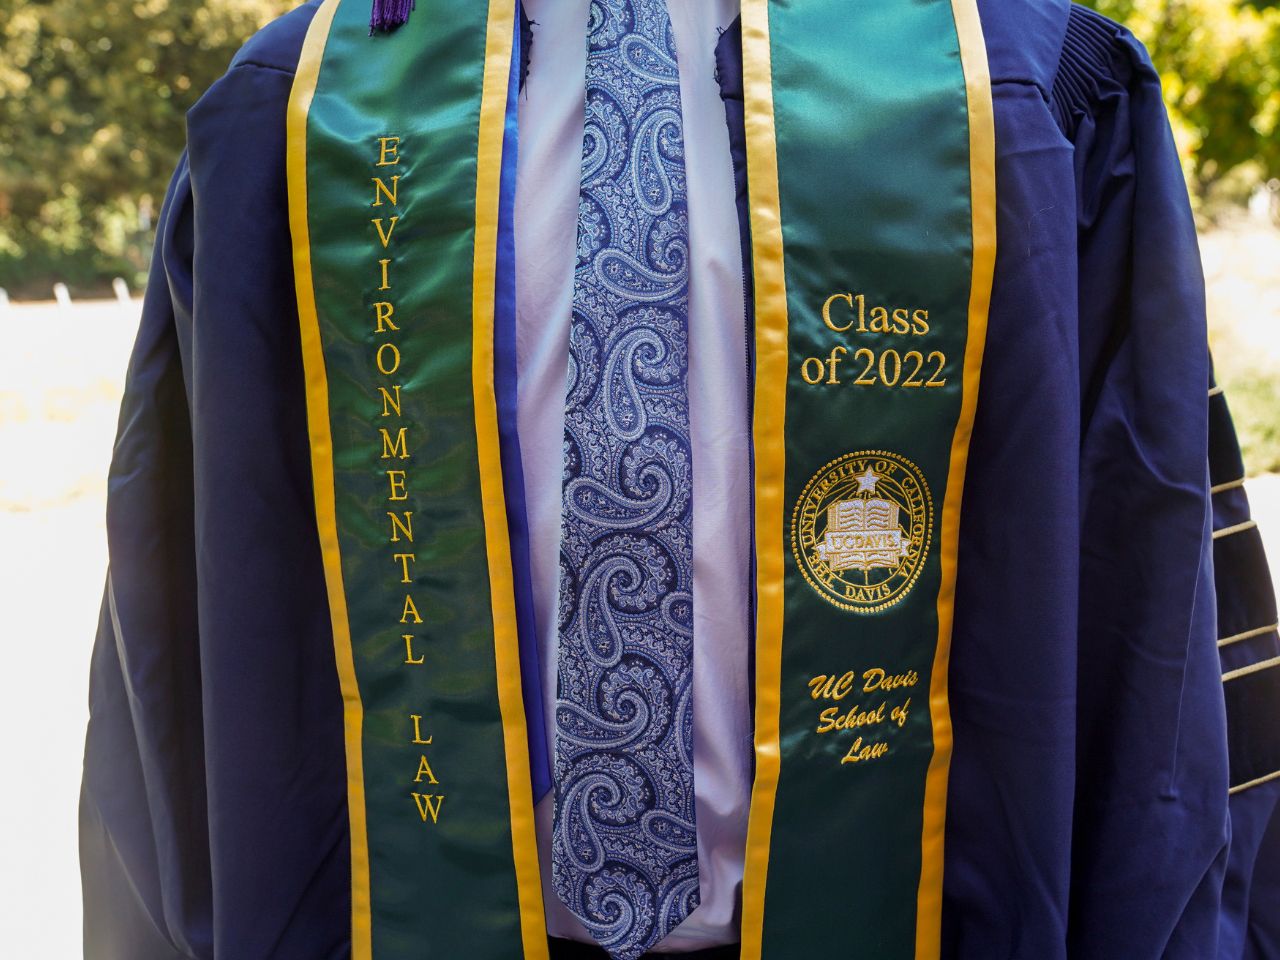 A student wearing a commencement robe and tie displays a green stole embroidered with the words "Environmental Law Class of 2022 UC Davis School of Law."